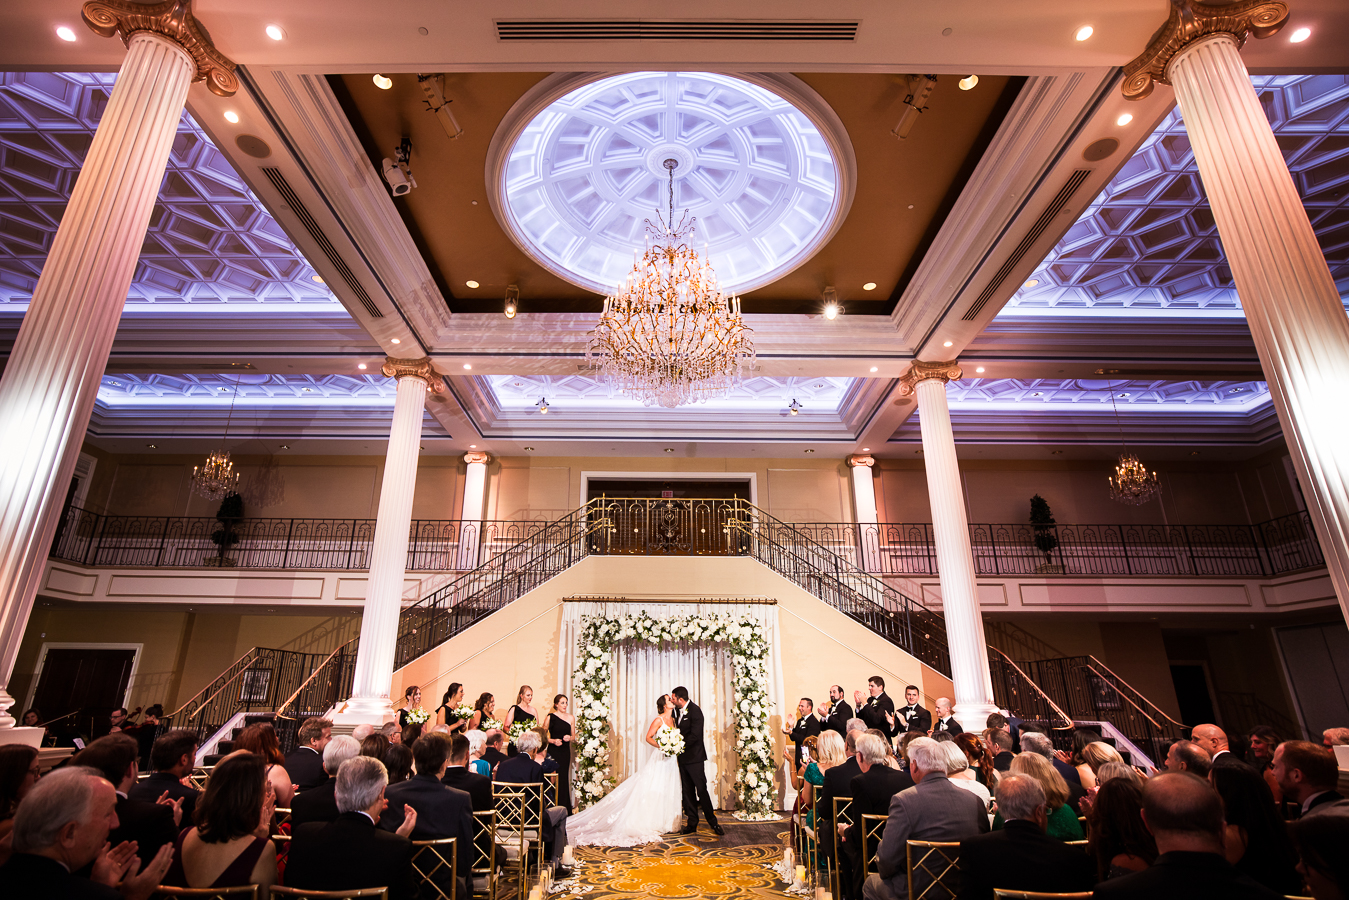 unique, creative perspective of the bride and groom as they share their first kiss with their ceremony space and the guests included in this image captured by palace at somerset park wedding photographer, lisa rhinehart